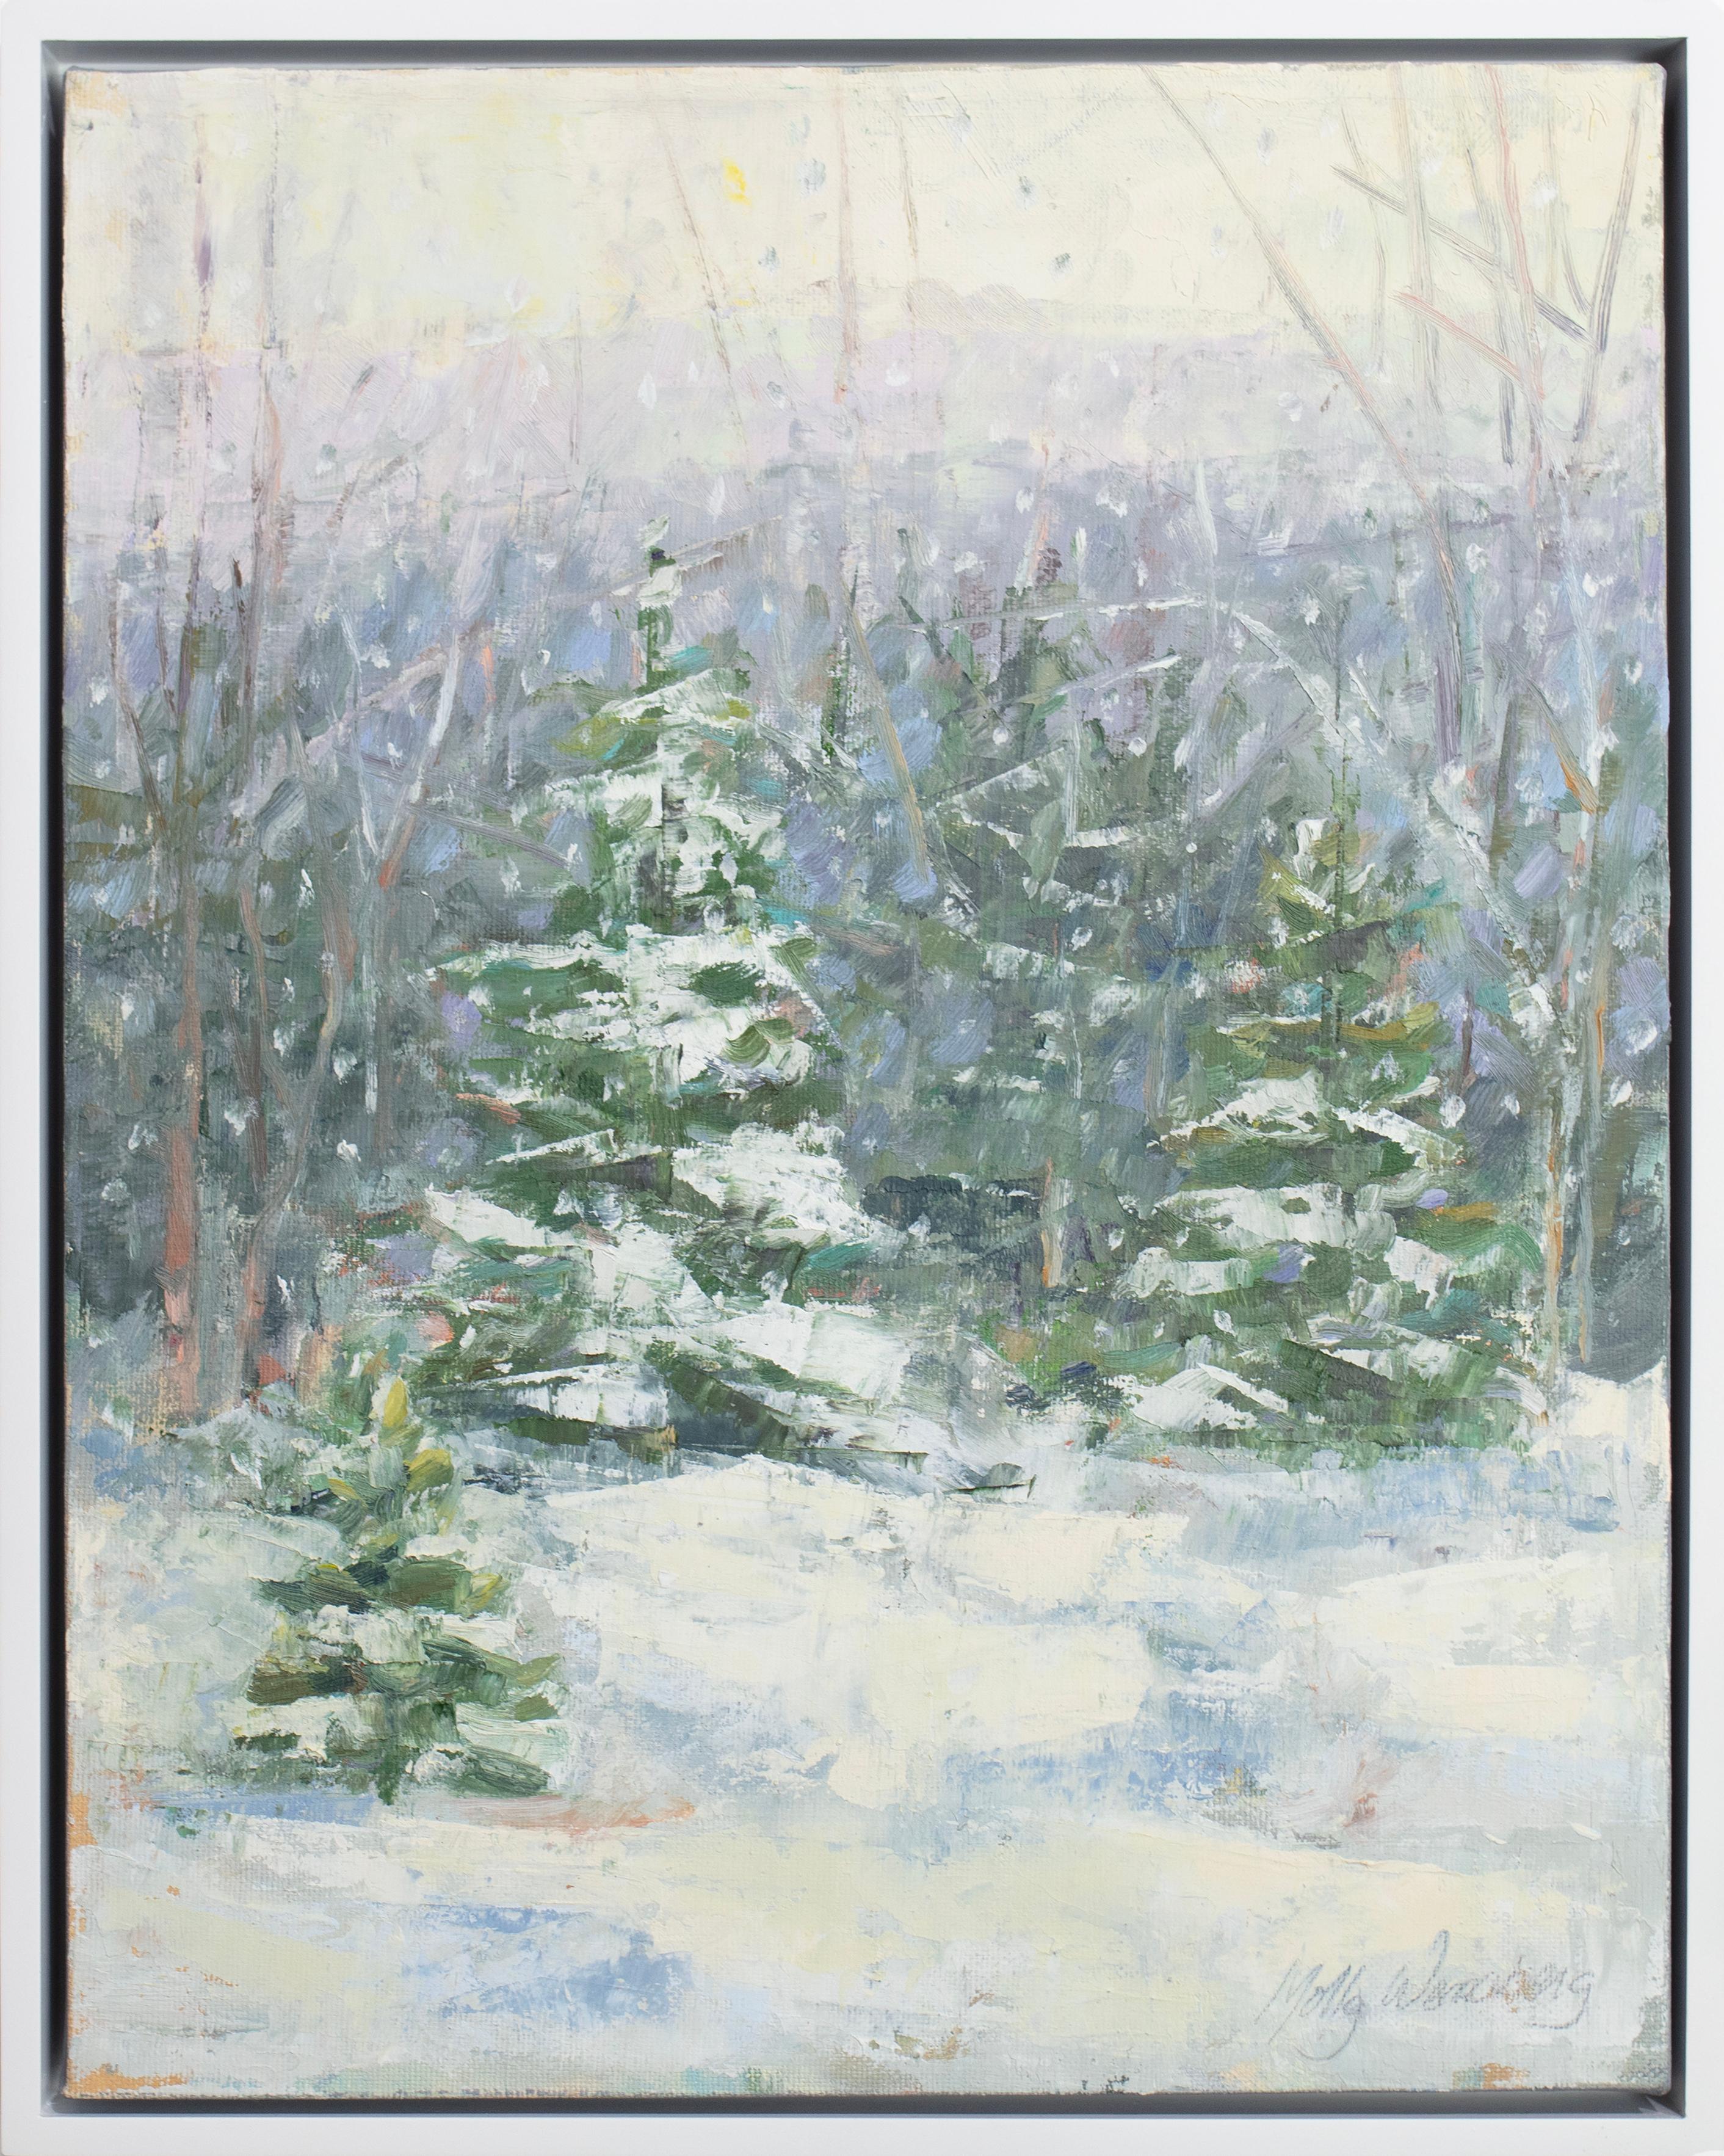 This impressionistic winter landscape painting by Molly Doe Wensberg features a cool blue, green, lavender, and white palette. The artist captures a scene of evergreen trees covered in snow, surrounded by a snow-covered ground and bare trees